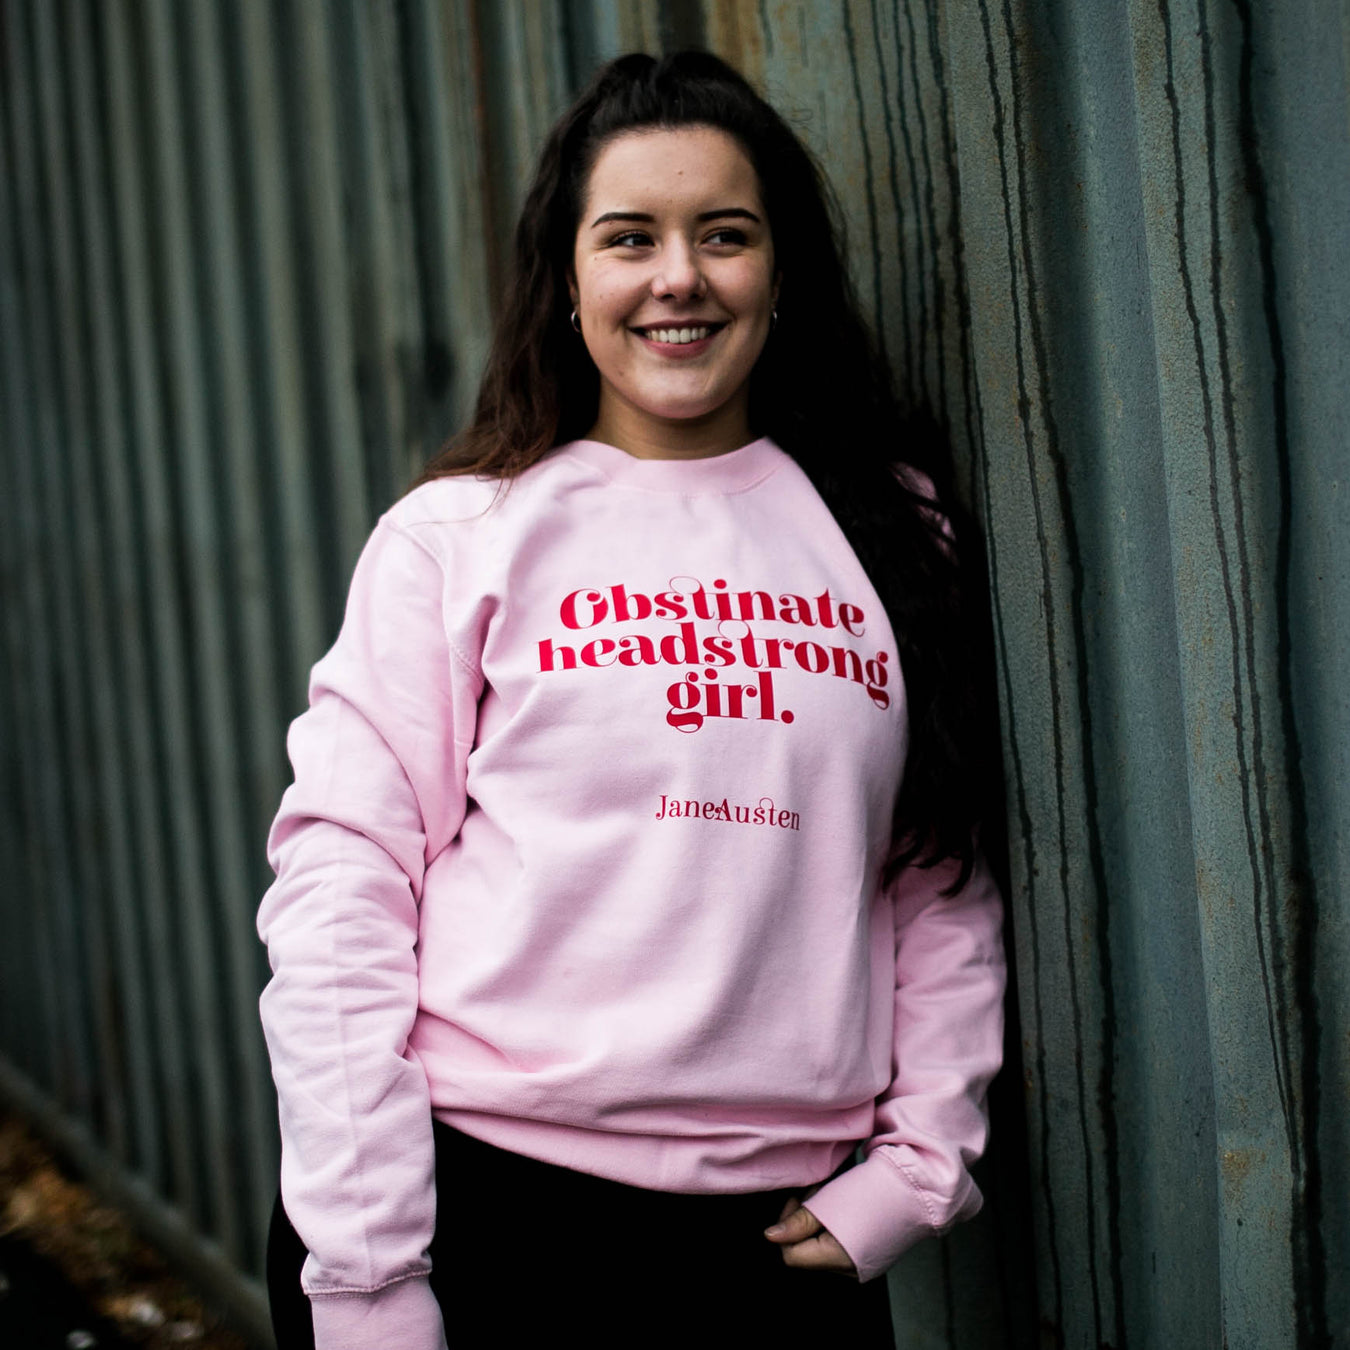 Shop our literary clothing, bookish apparel fashion. Featuring novel inspired jumpers and sweatshirts. Perfect for book lovers, bookworms, readers and bibliophiles. Obstinate Headstrong Girl by Jane Austen.